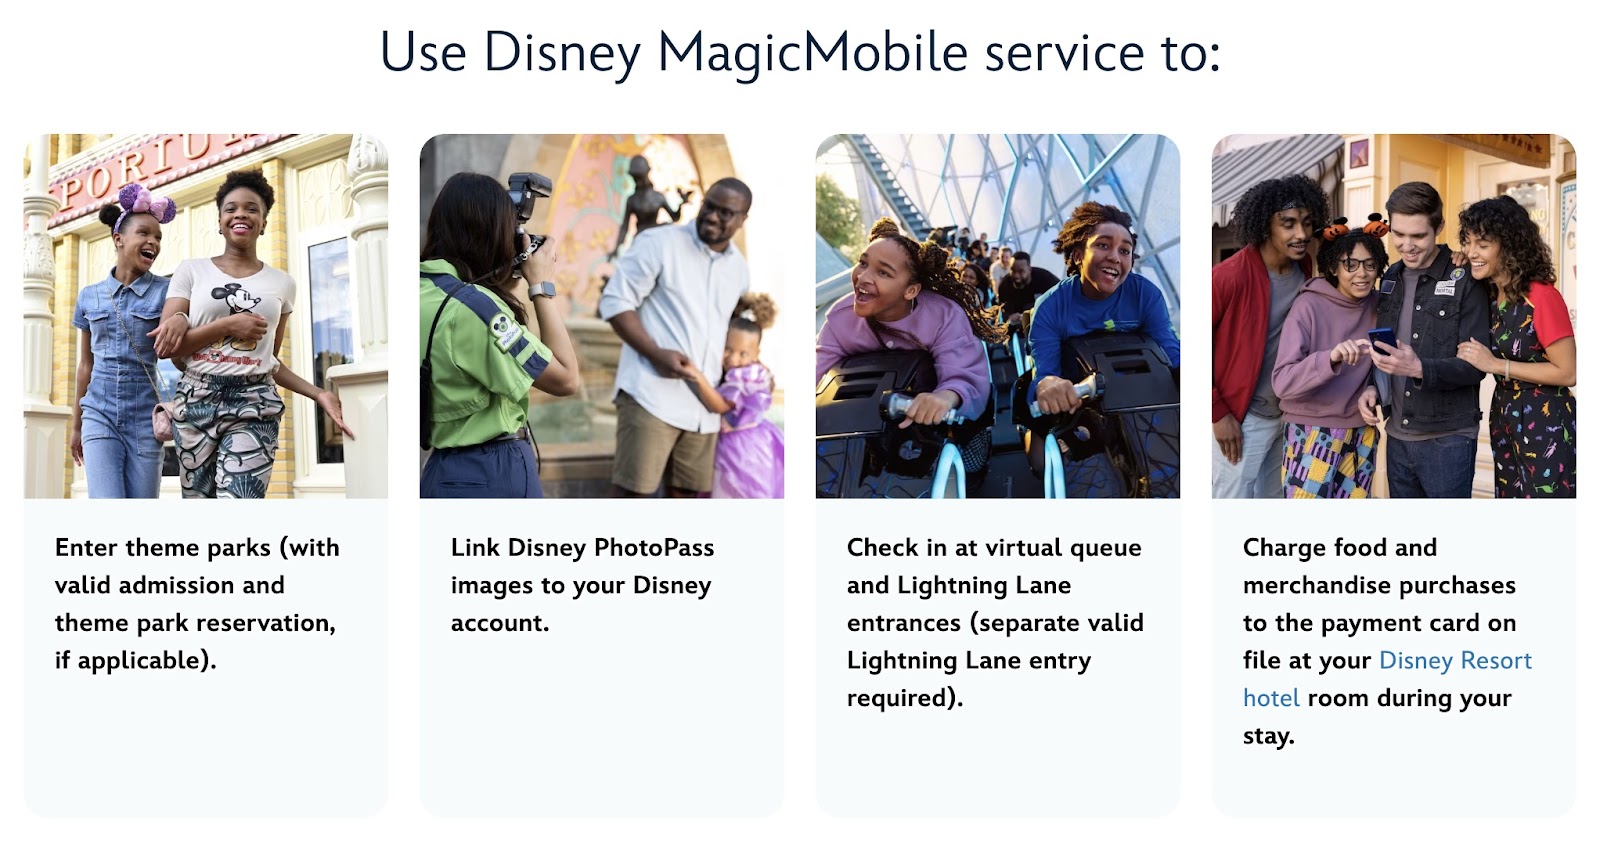 "Use Disney MagicMobile to:" section of Disney's page